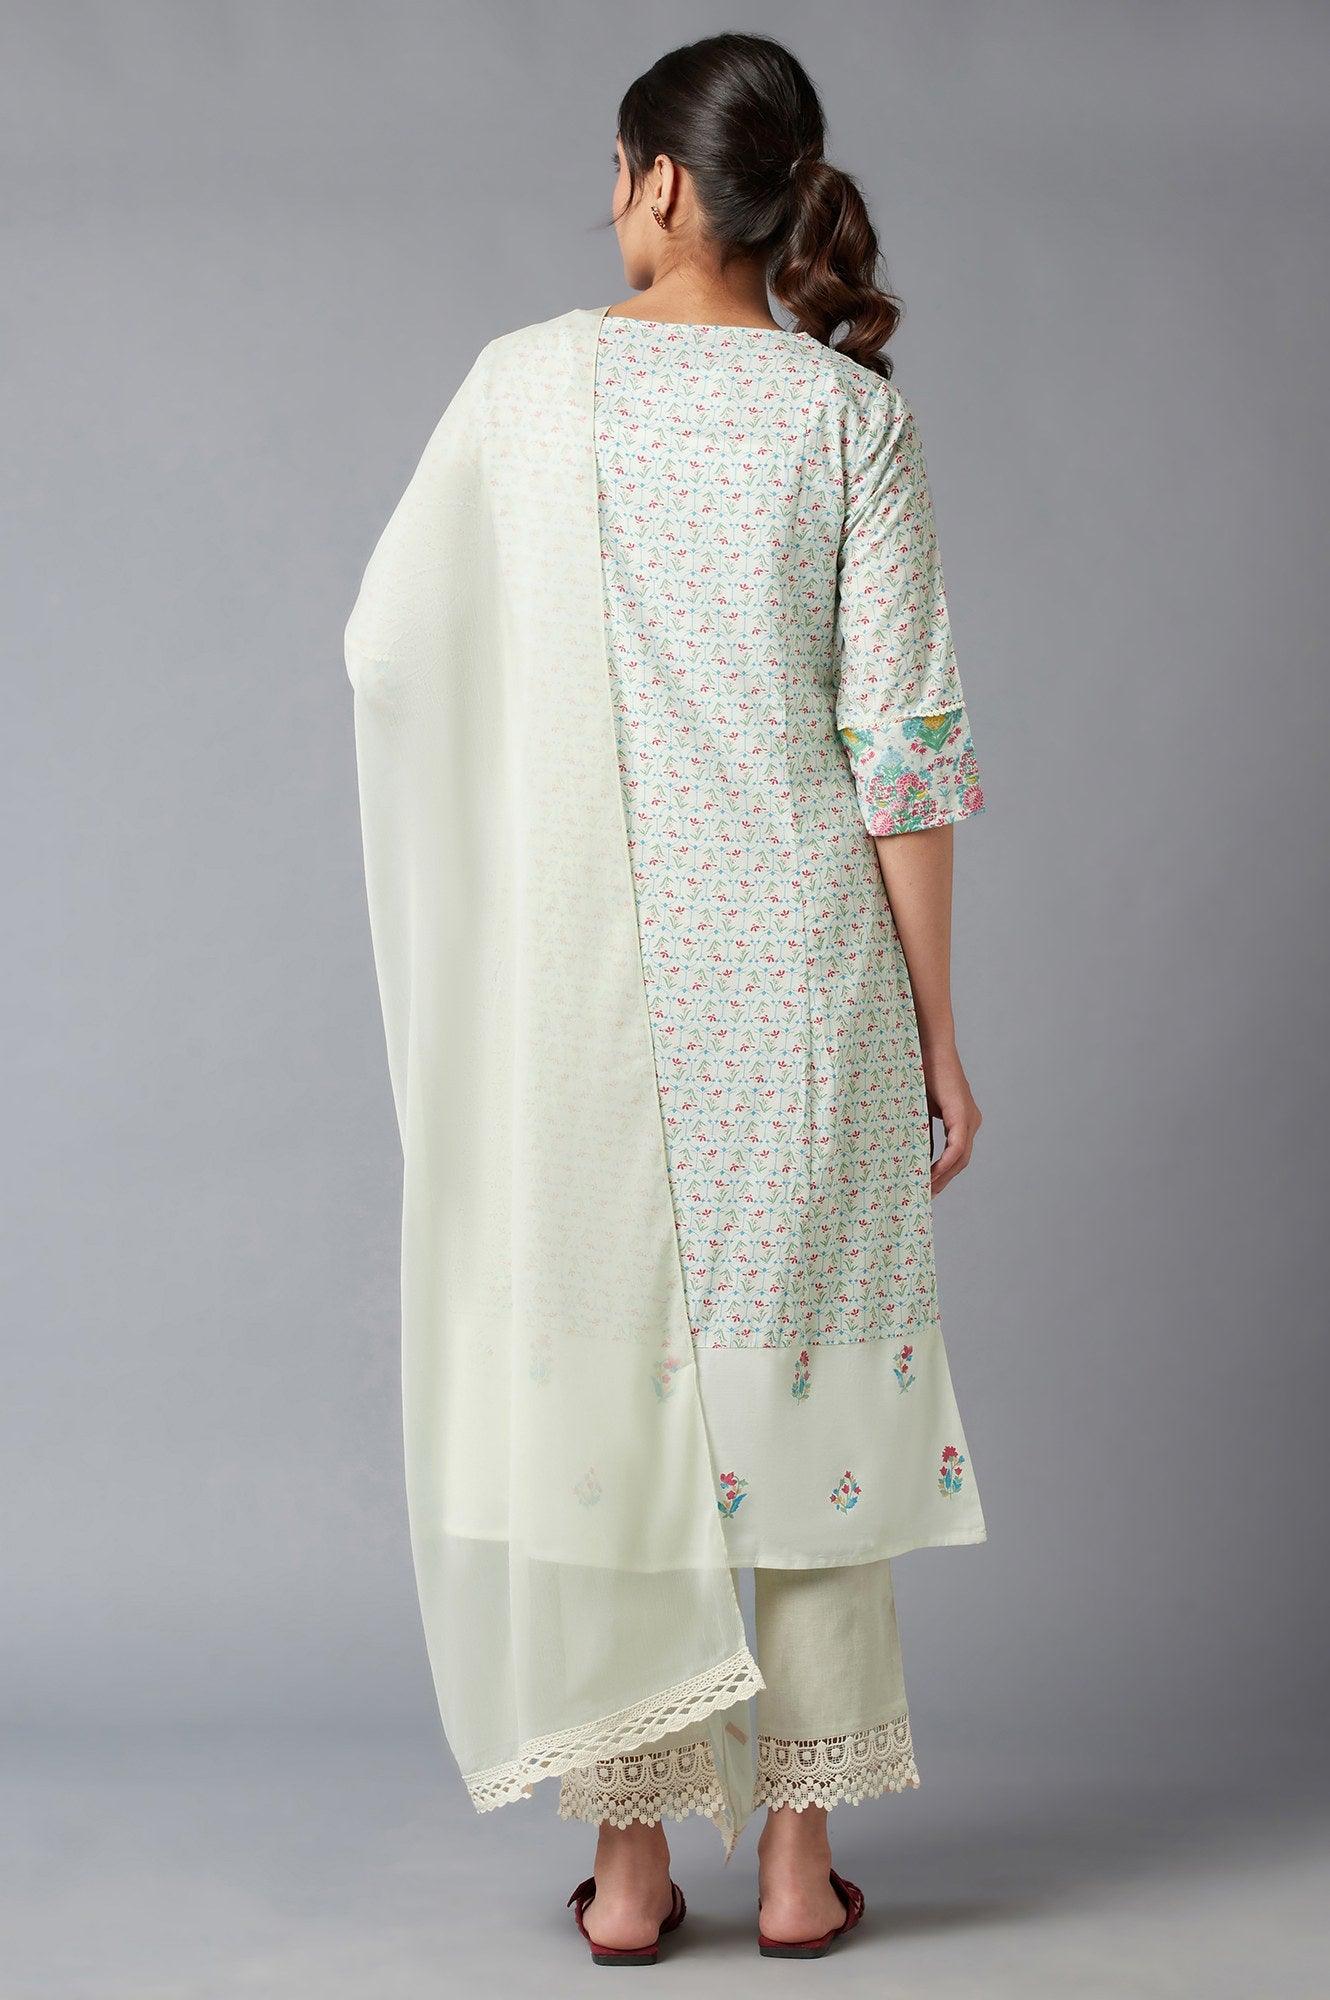 Light Green Embroidered kurta In Keyhole Neckline With Straight Pants And Chiffon Dupatta - wforwoman